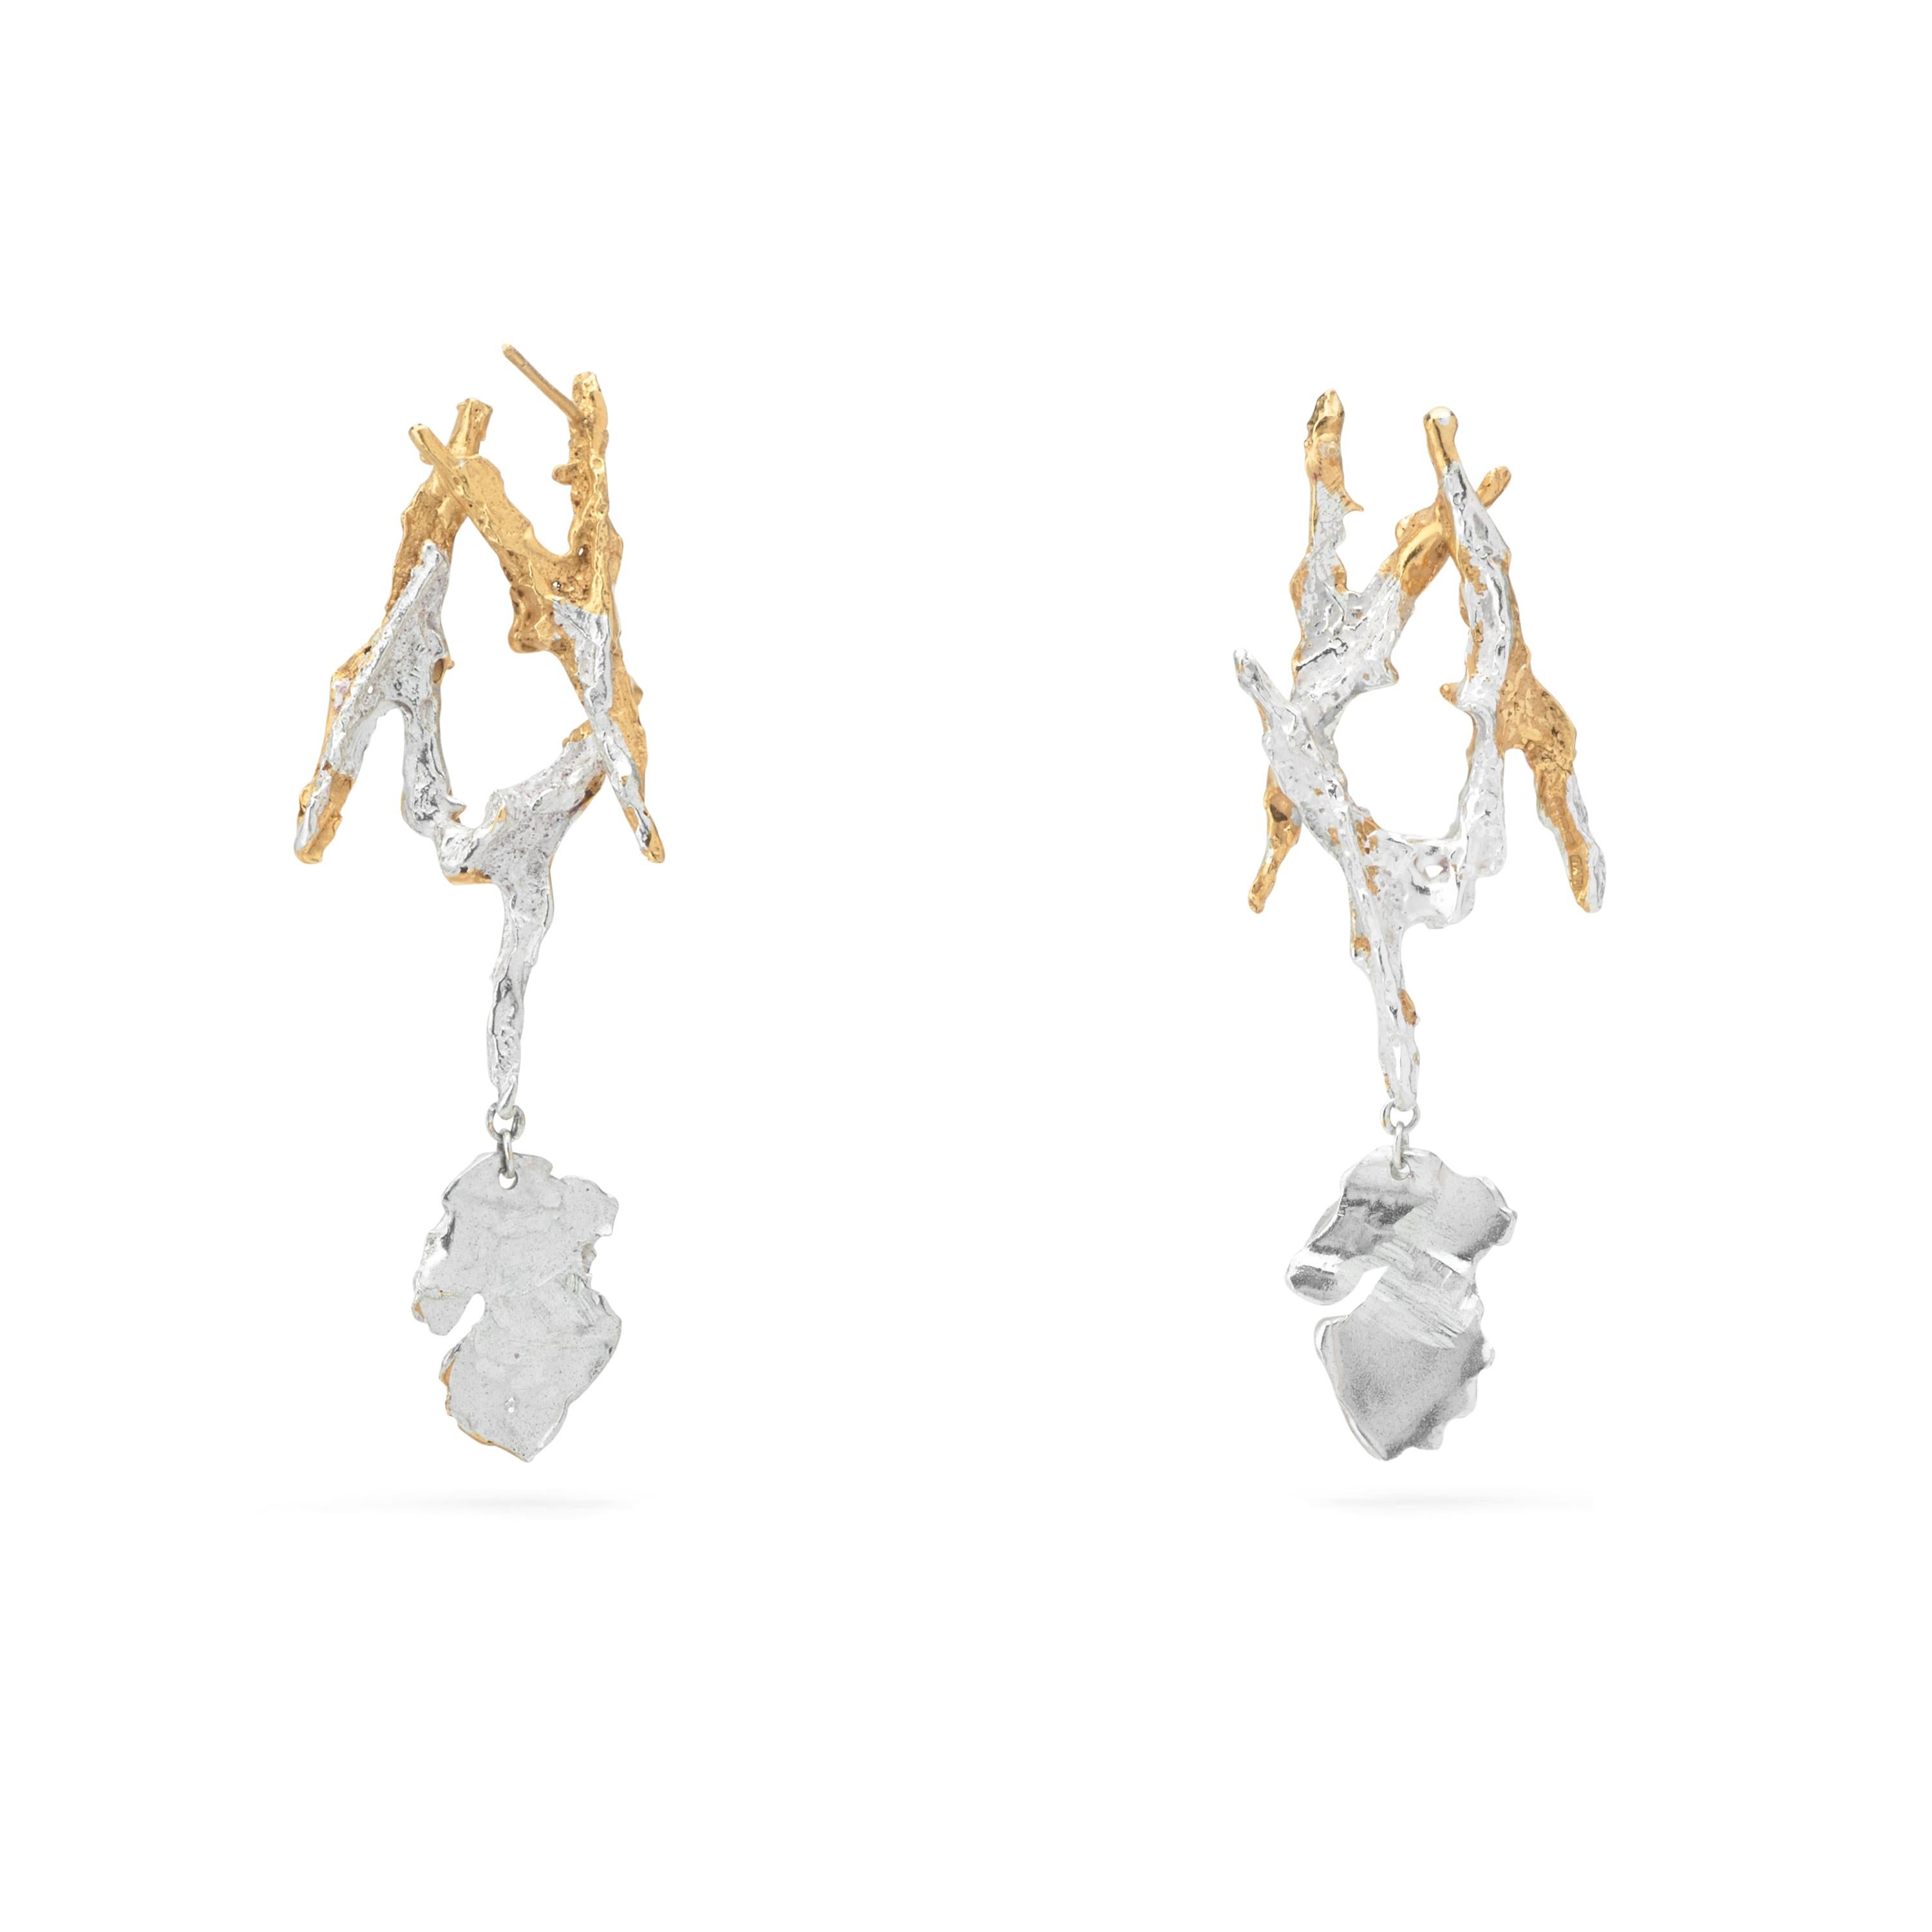 These earrings take their name from a Turkish word meaning ‘belonging to the moon’. Believed by some to wield influence over everything from ocean tides to fertility, the moon is a potent symbol of the alluring, magical power of night. These